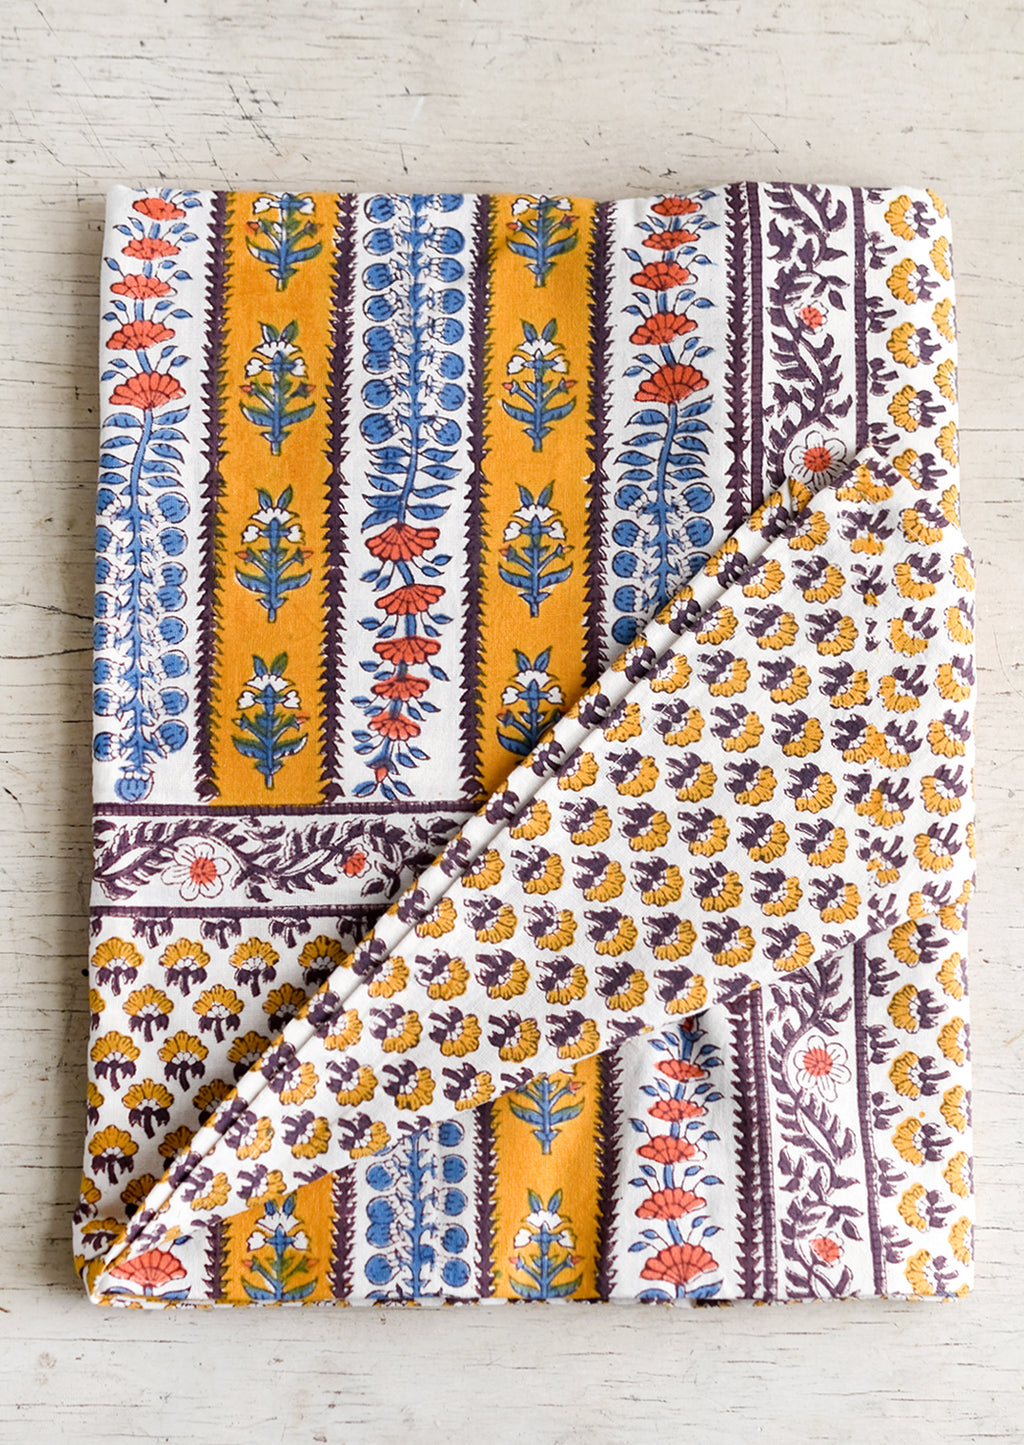 2: A stripe floral print tablecloth in marigold, purple and blue.